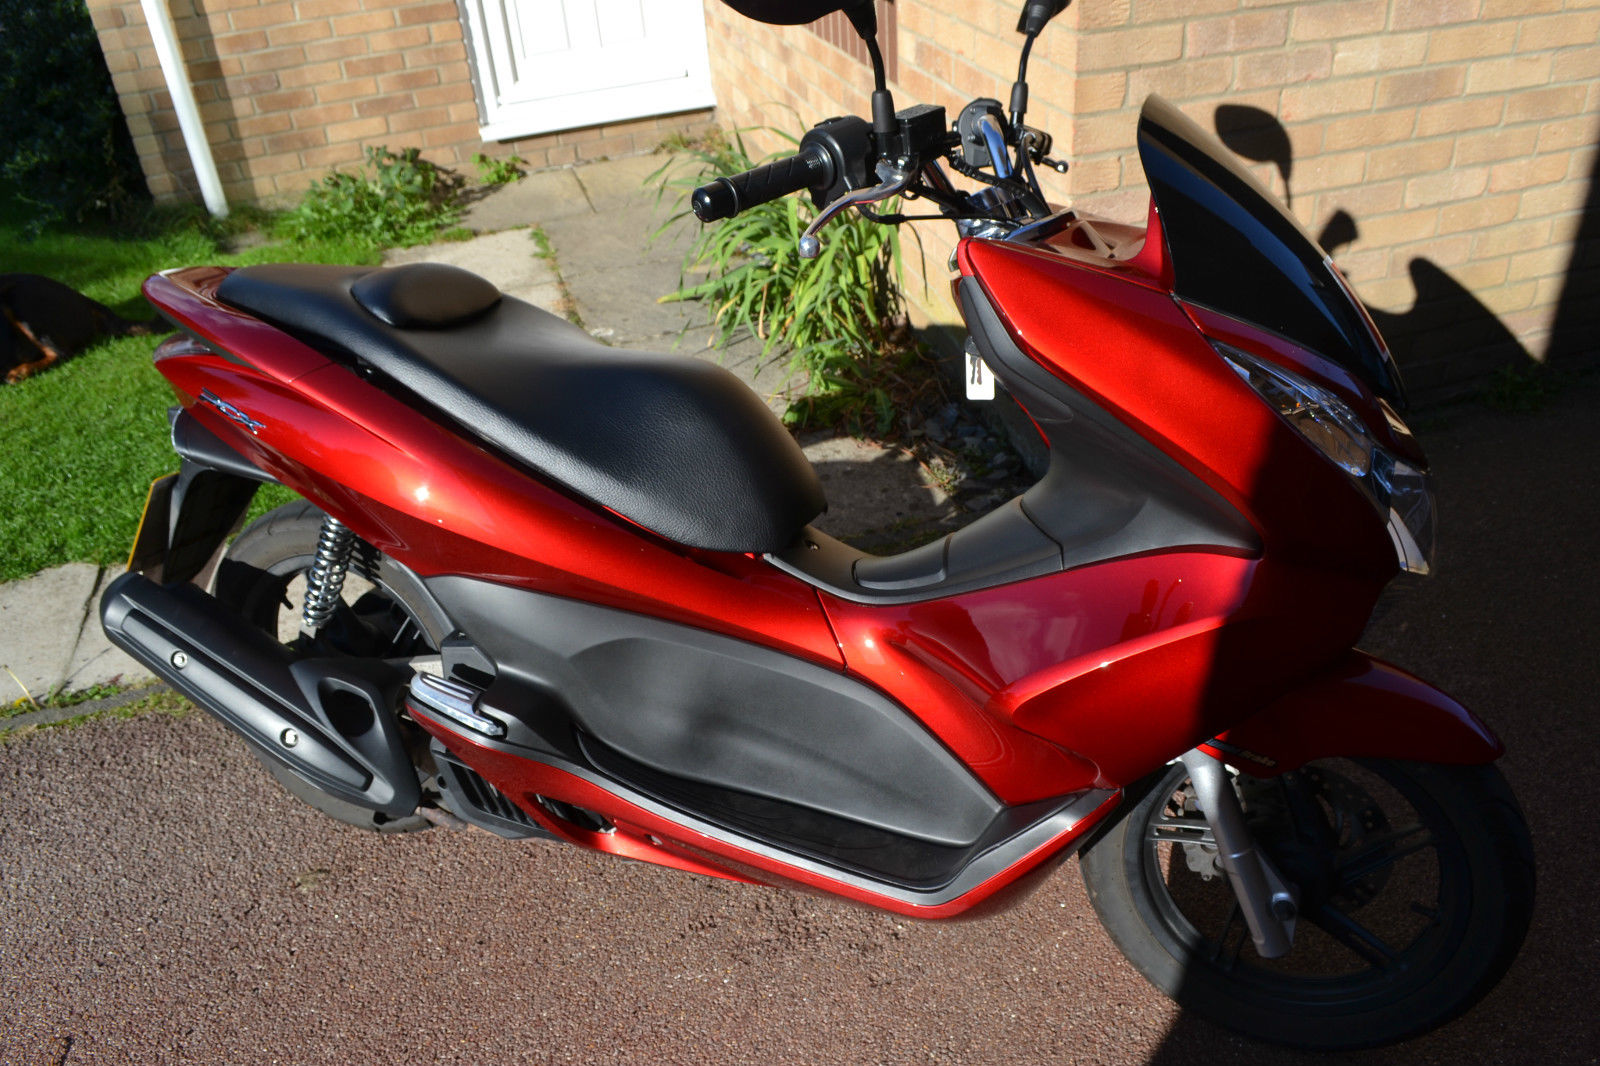 Honda Pcx 125 Immaculate Condition 00 Miles One Owner Full Honda Sh